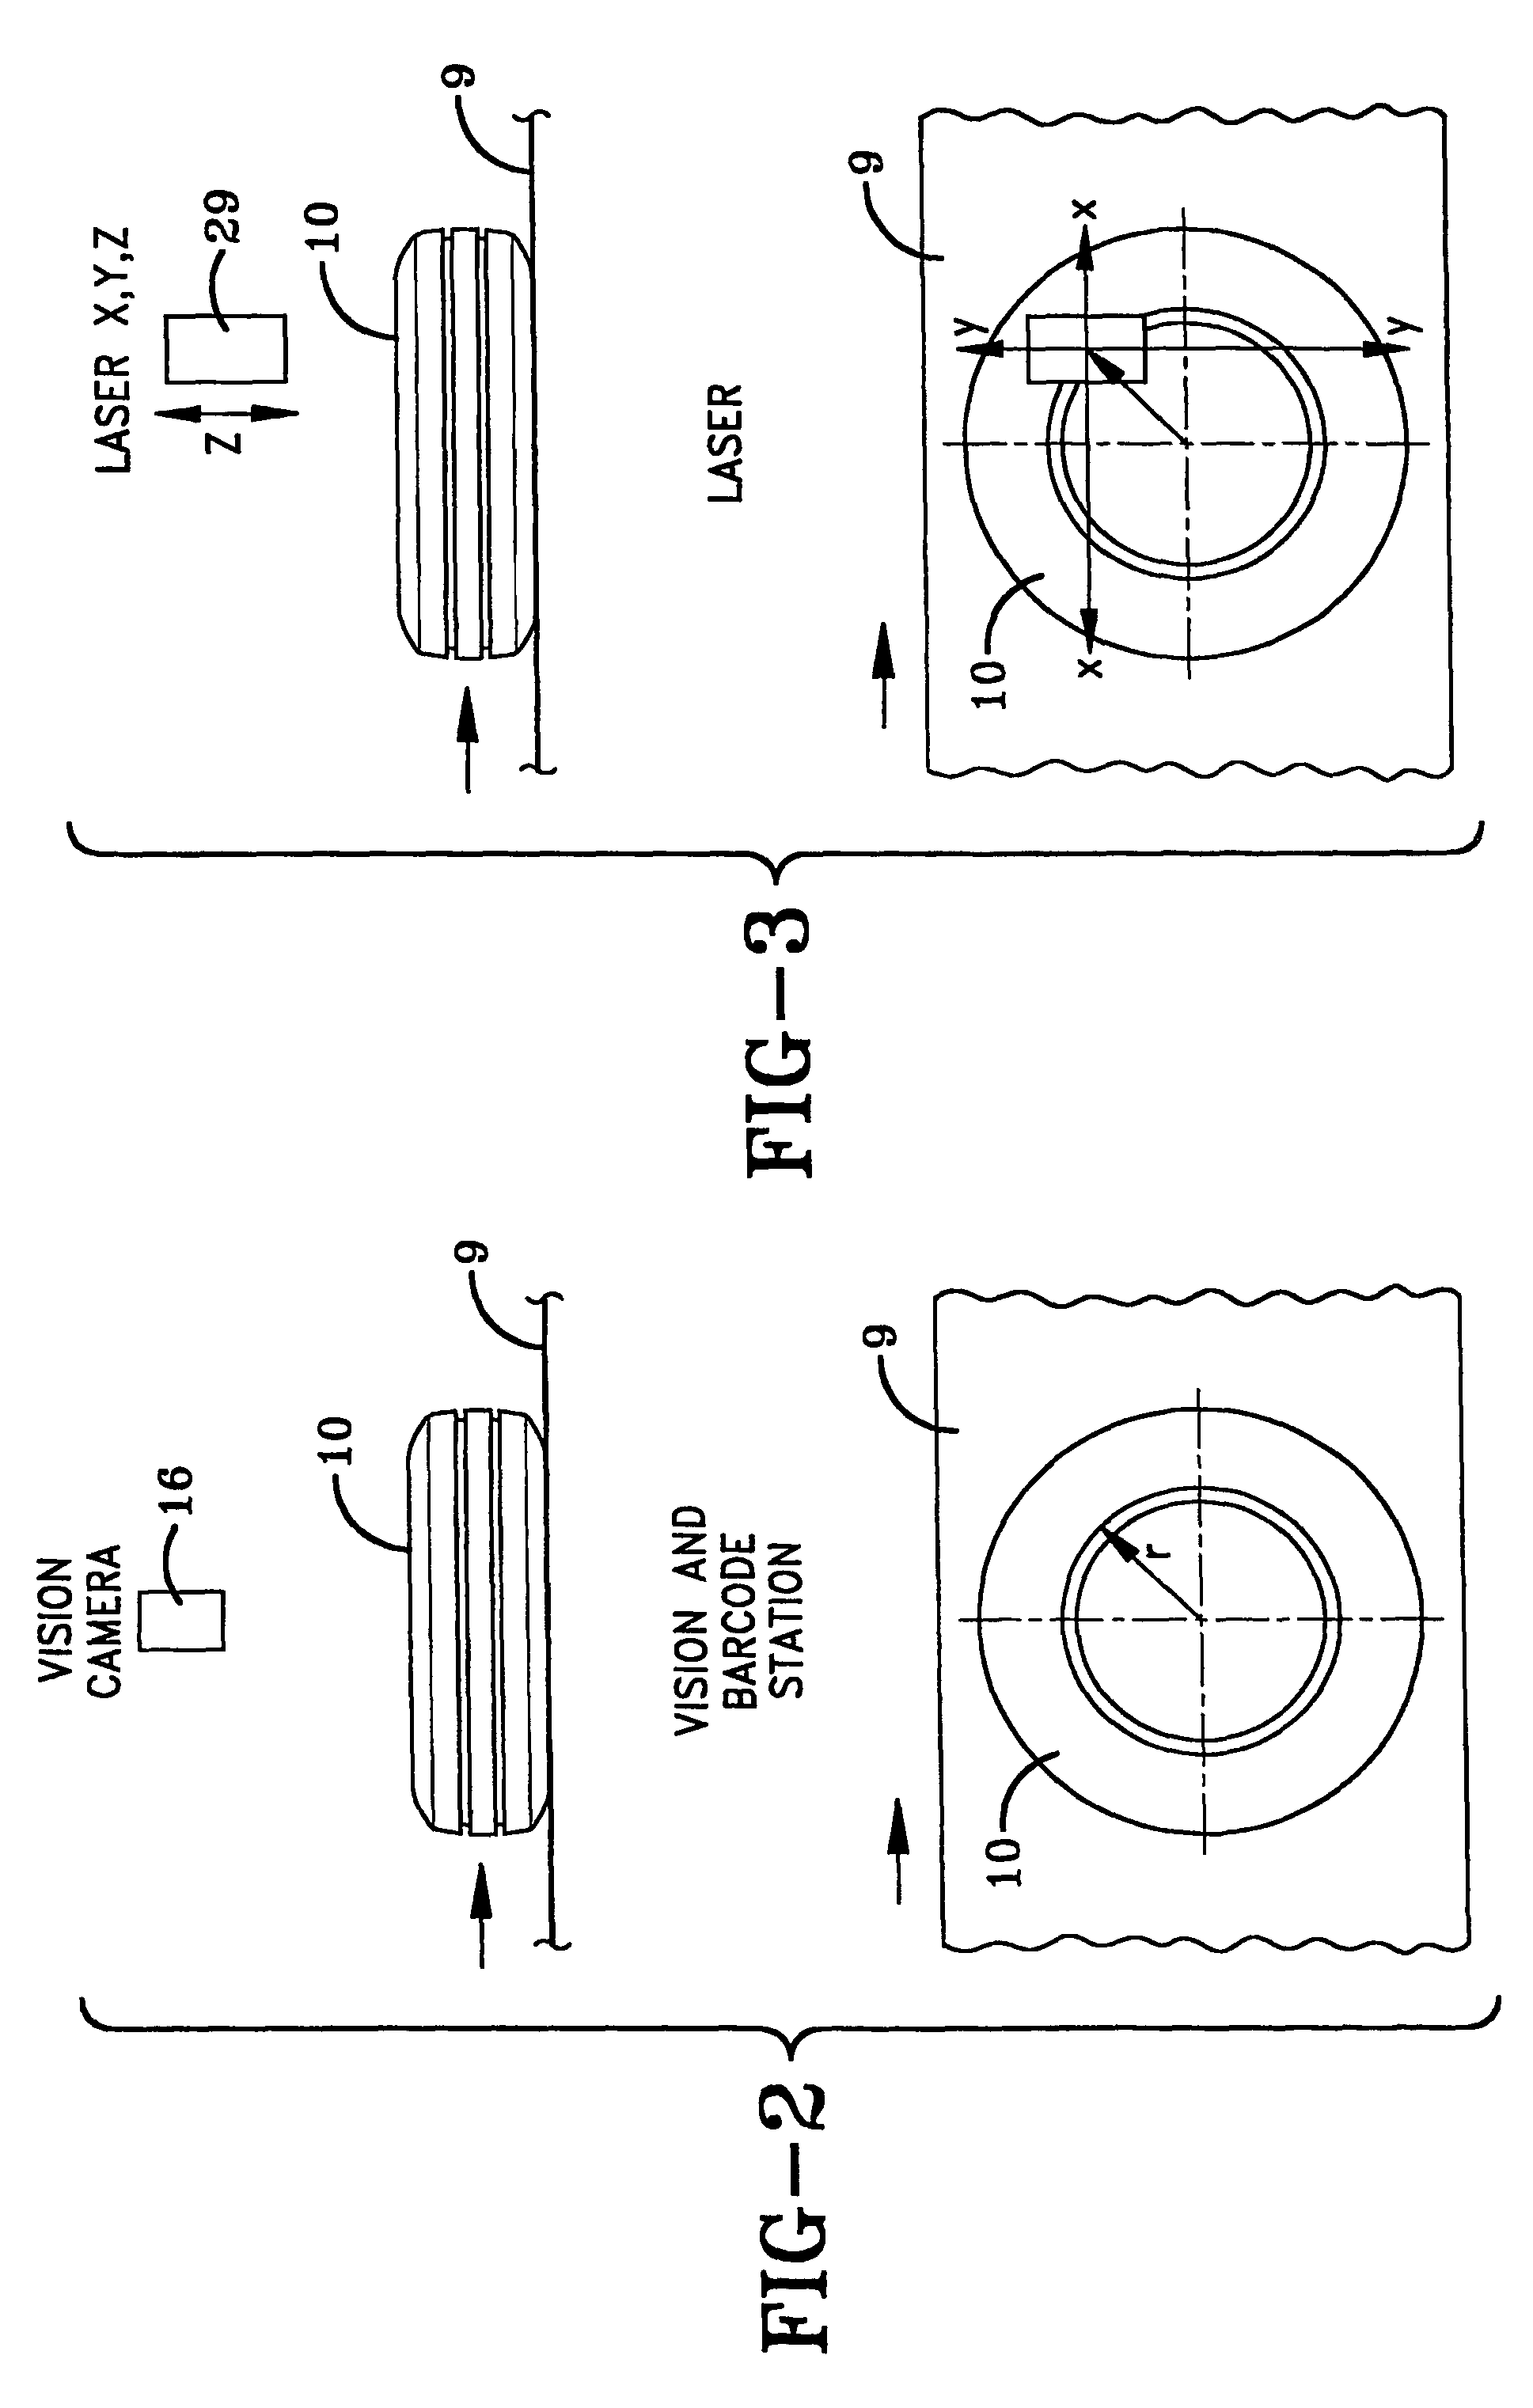 Method and system for marking tires